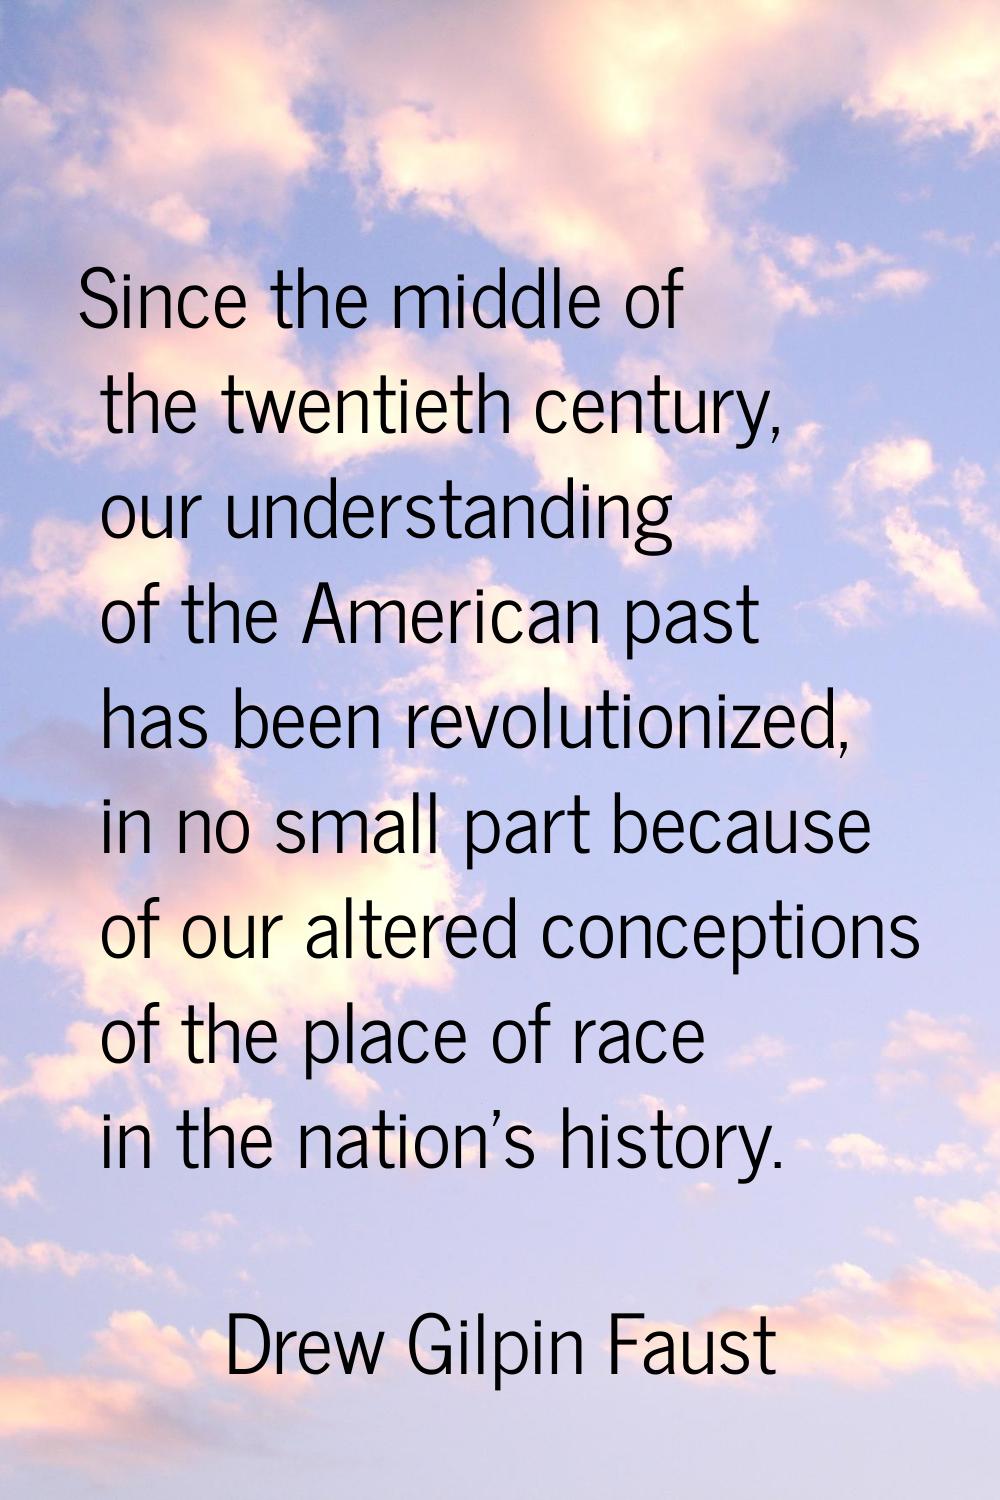 Since the middle of the twentieth century, our understanding of the American past has been revoluti